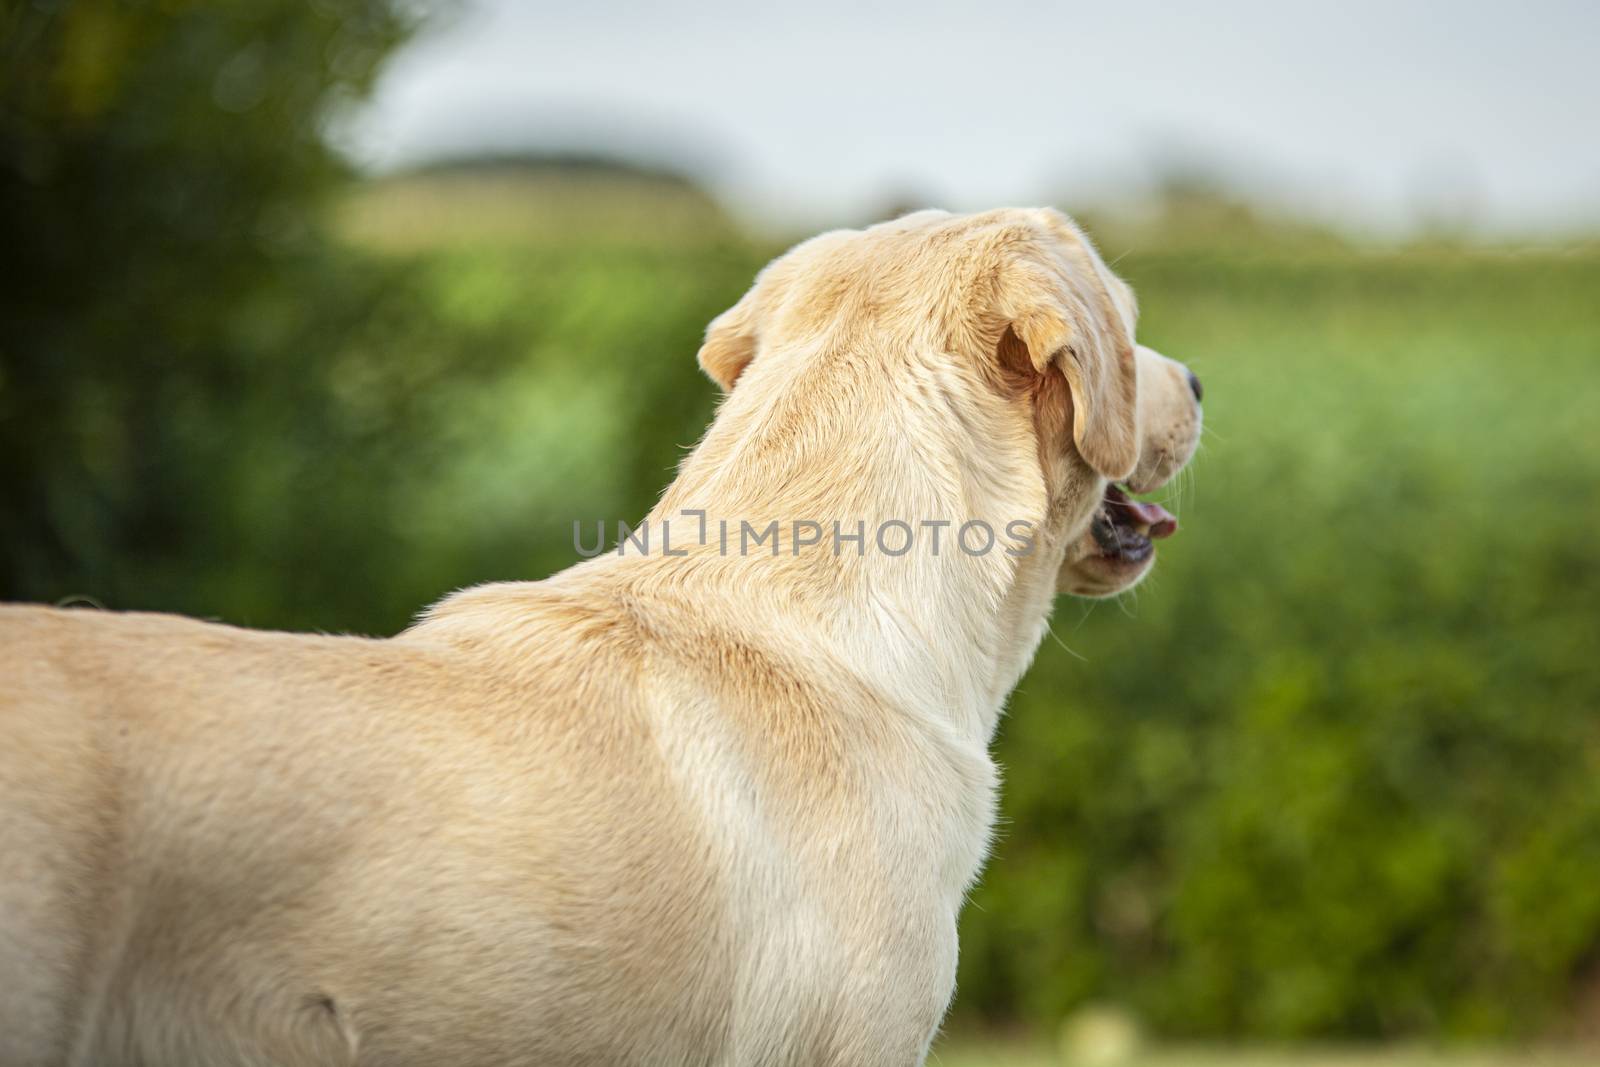 Labrador Dog from behind with a countryside background